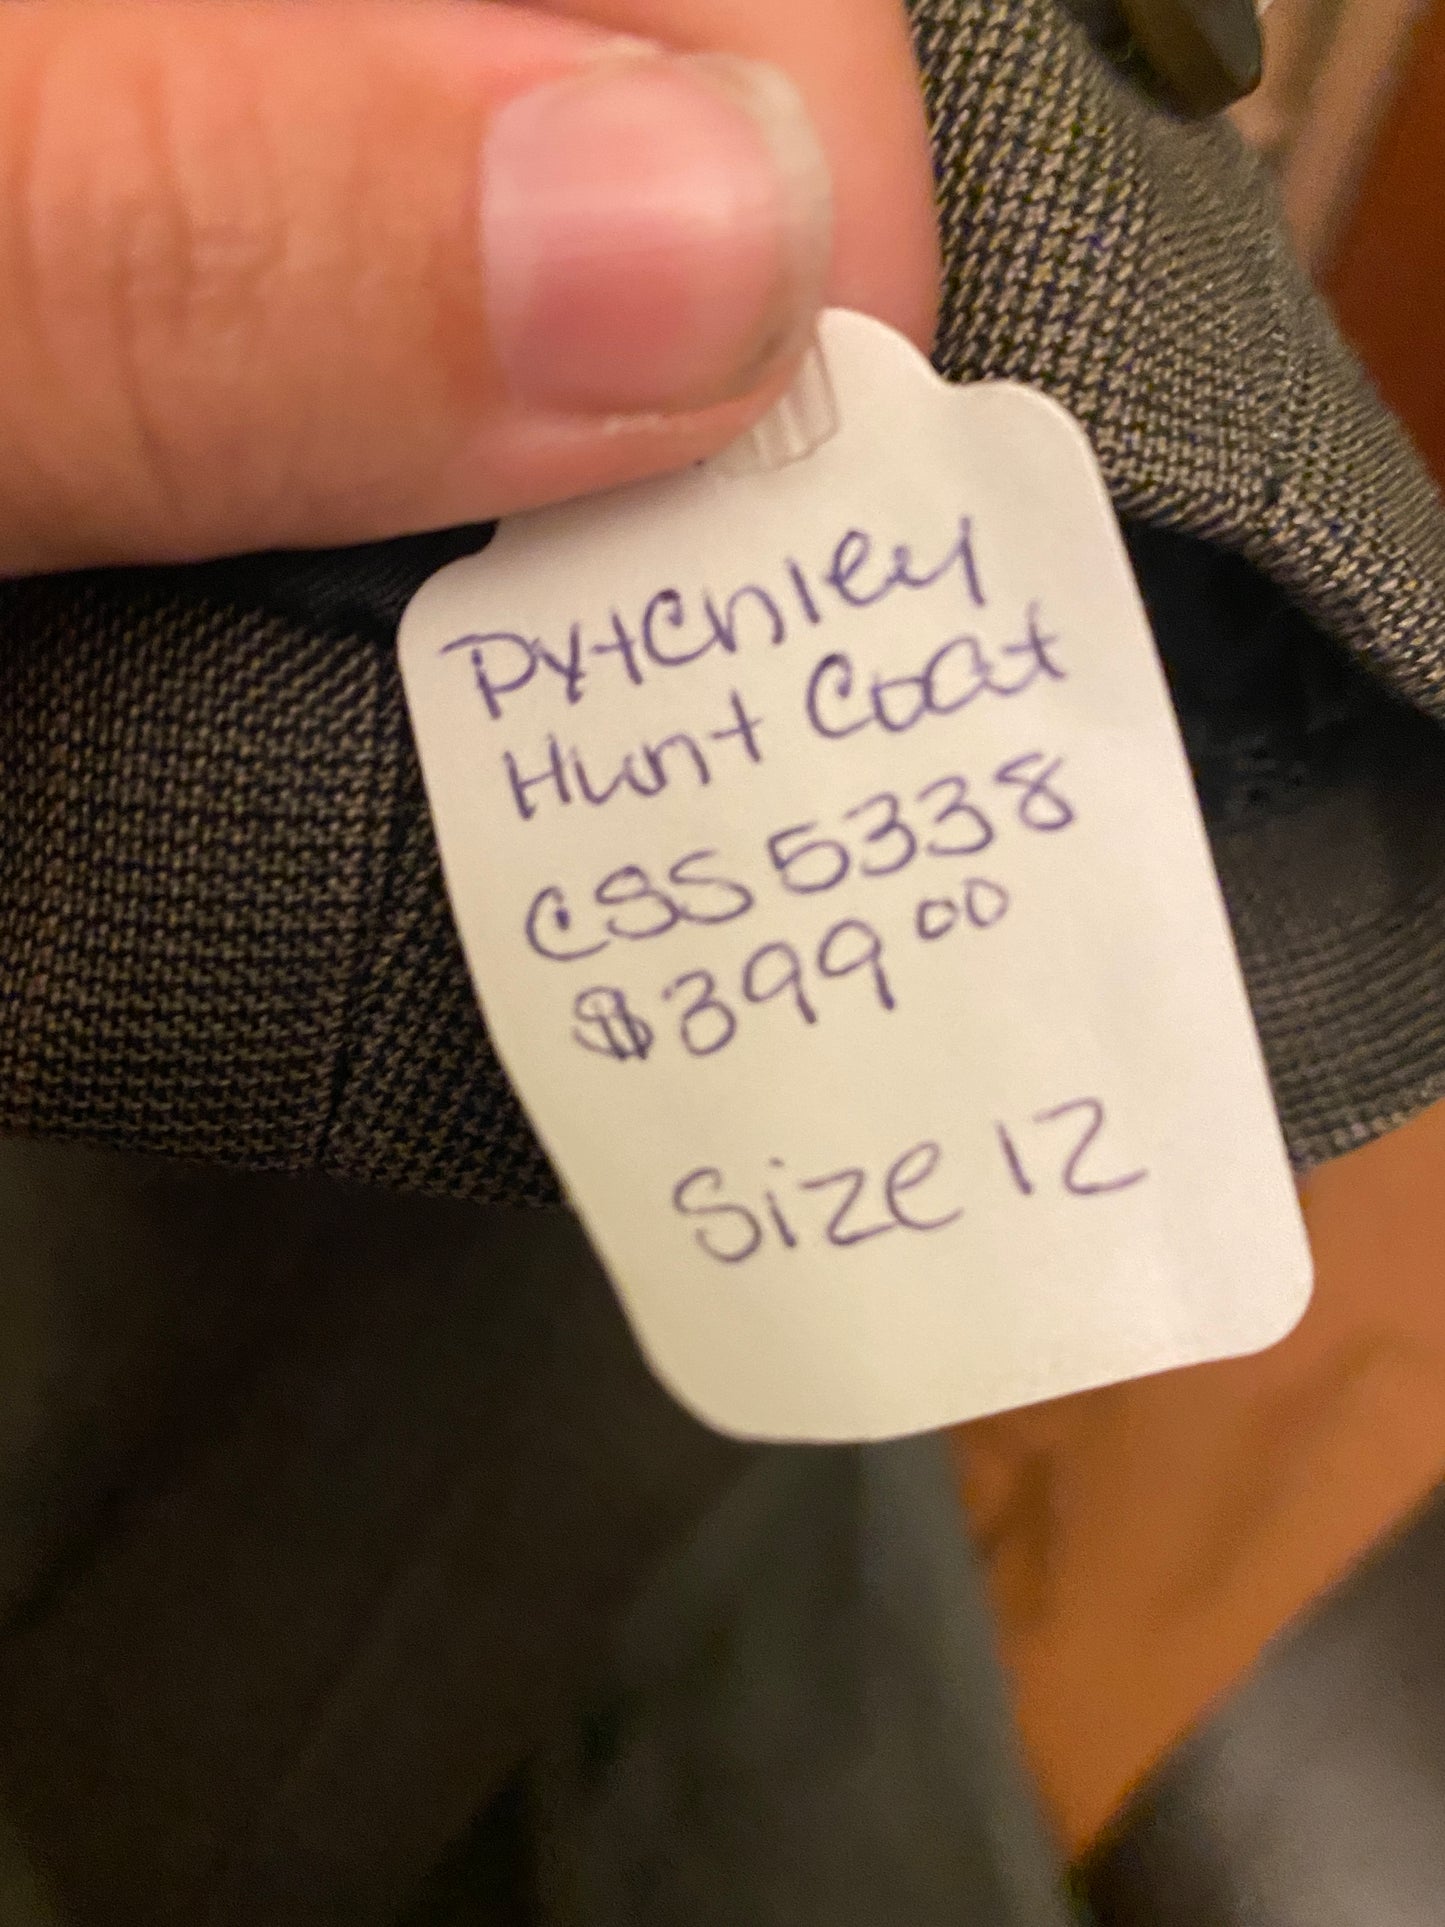 12R Pytchley Brown/Gray Hunt Coat